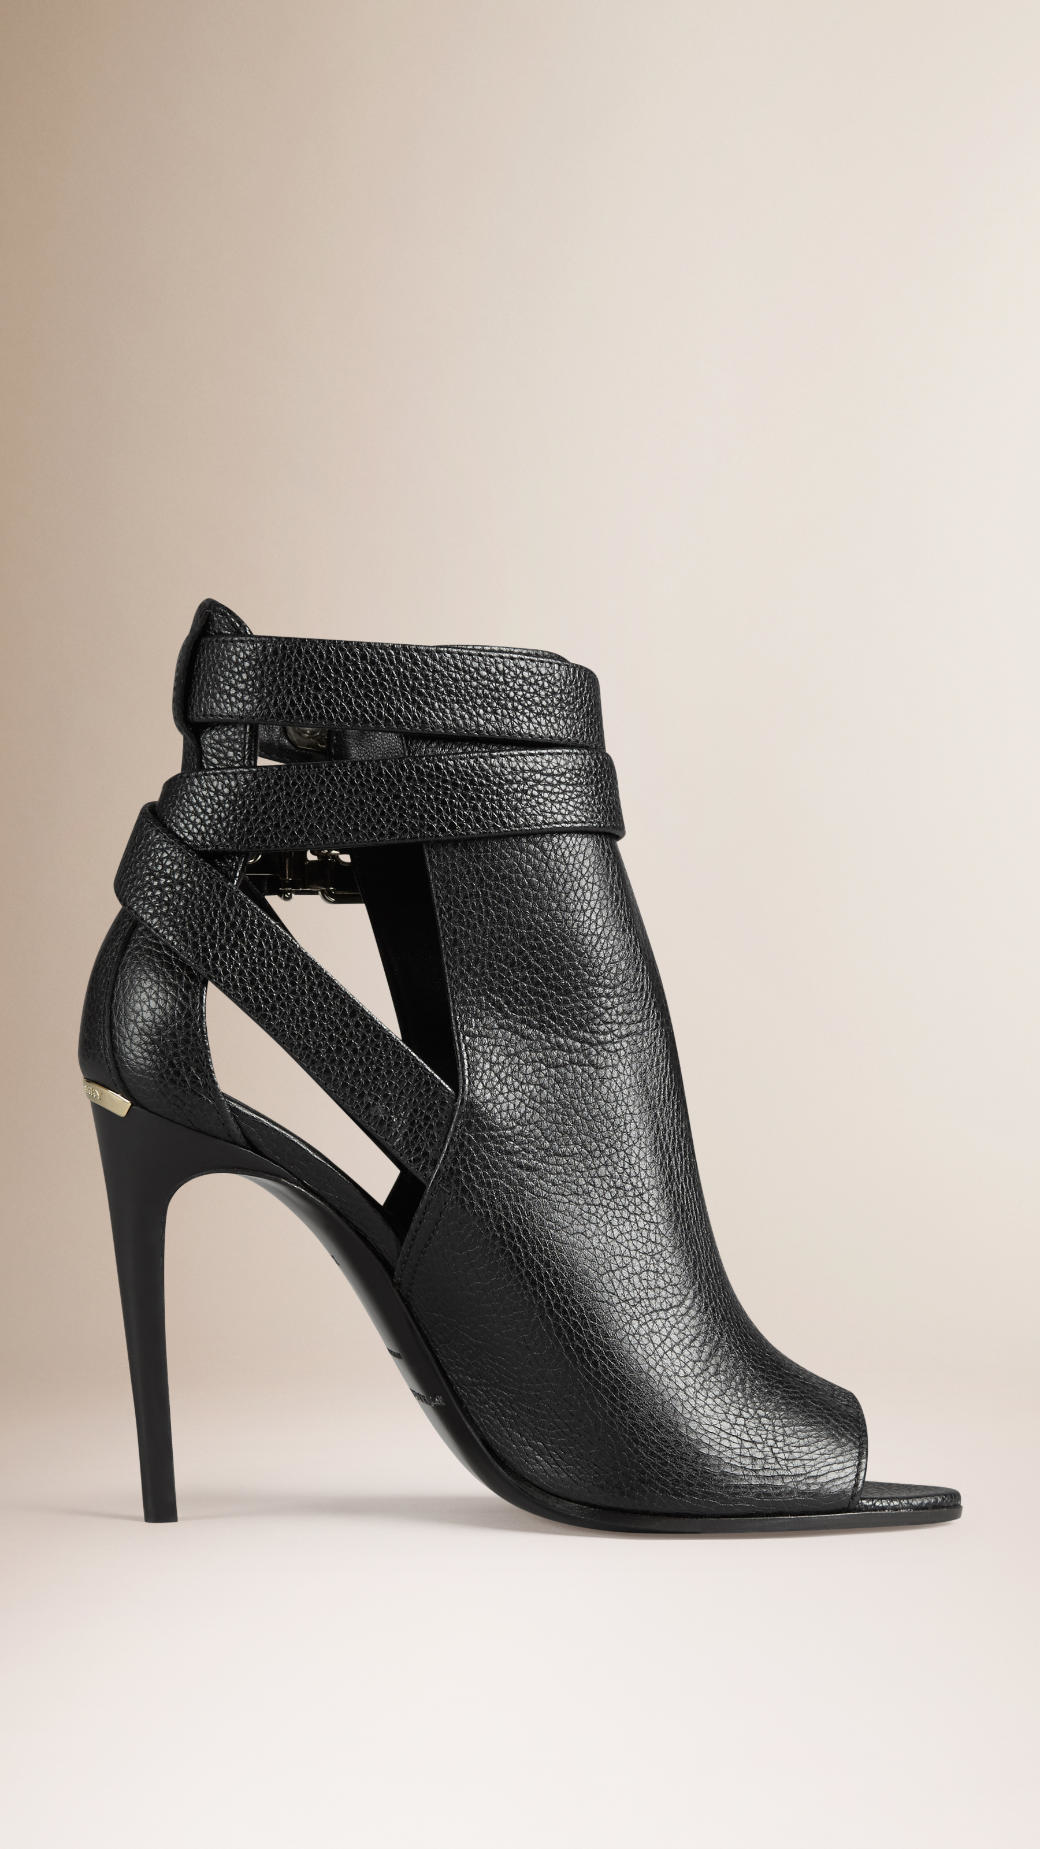 Burberry Buckle Detail Leather Peep-toe Ankle Boots in Black - Lyst